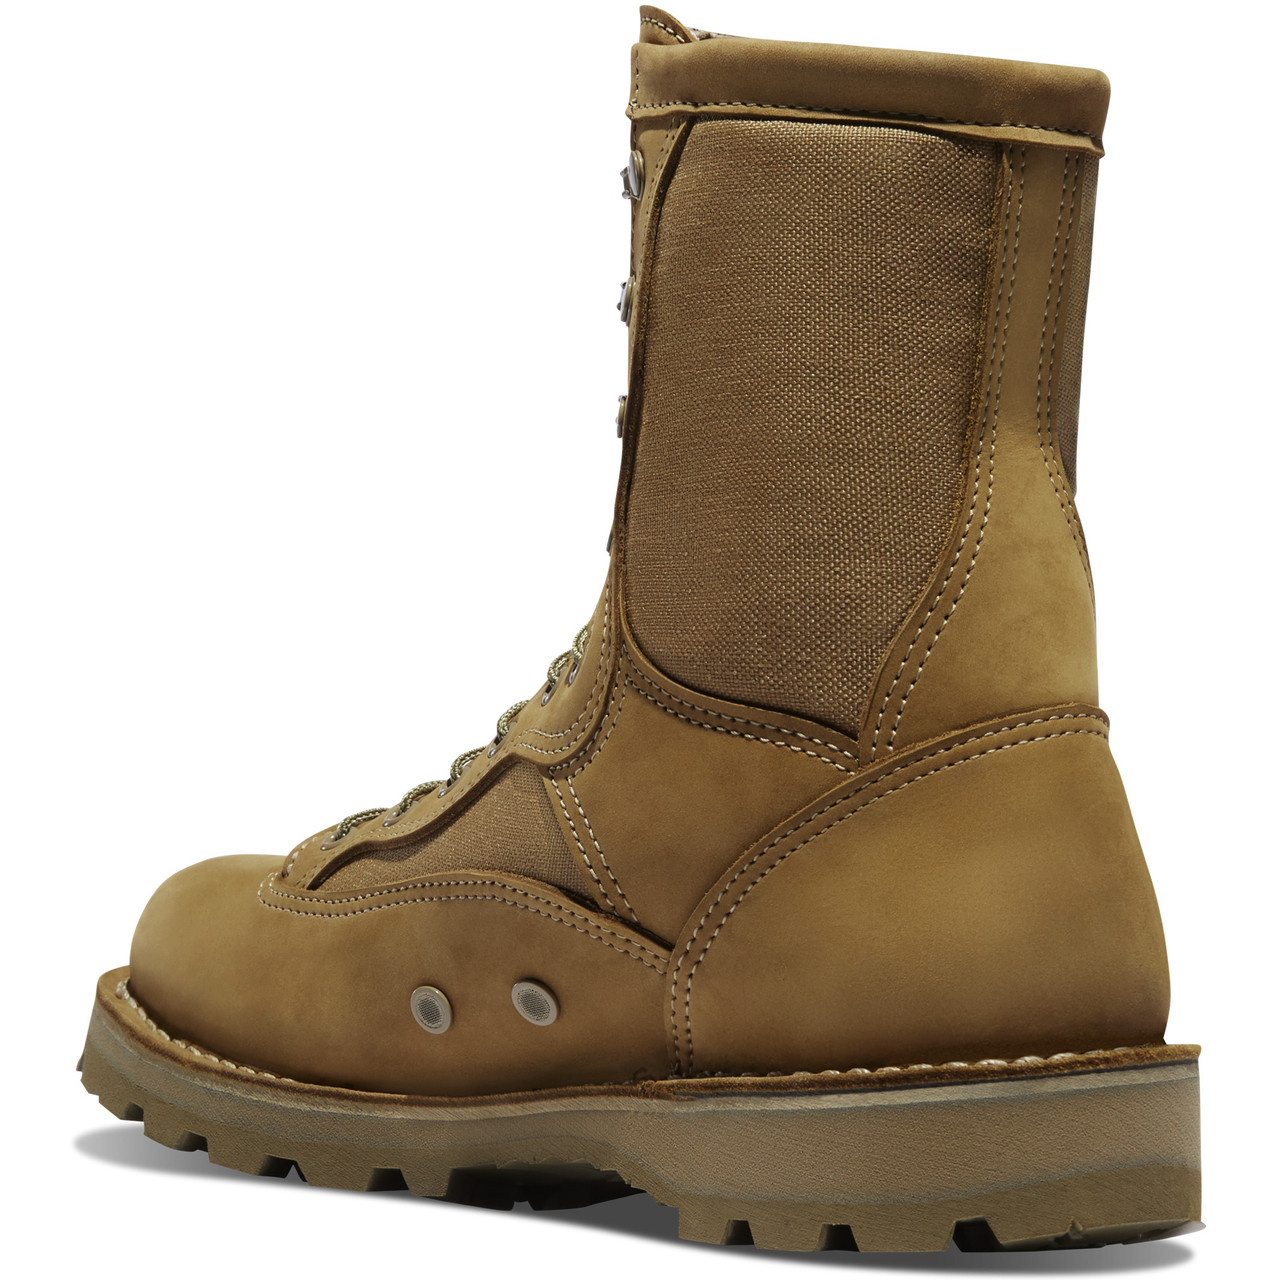 DANNER® MARIBE EXPEDITIONARY BOOT 8" HOT MOJAVE (M.E.B.) TACTICAL BOOTS 53110